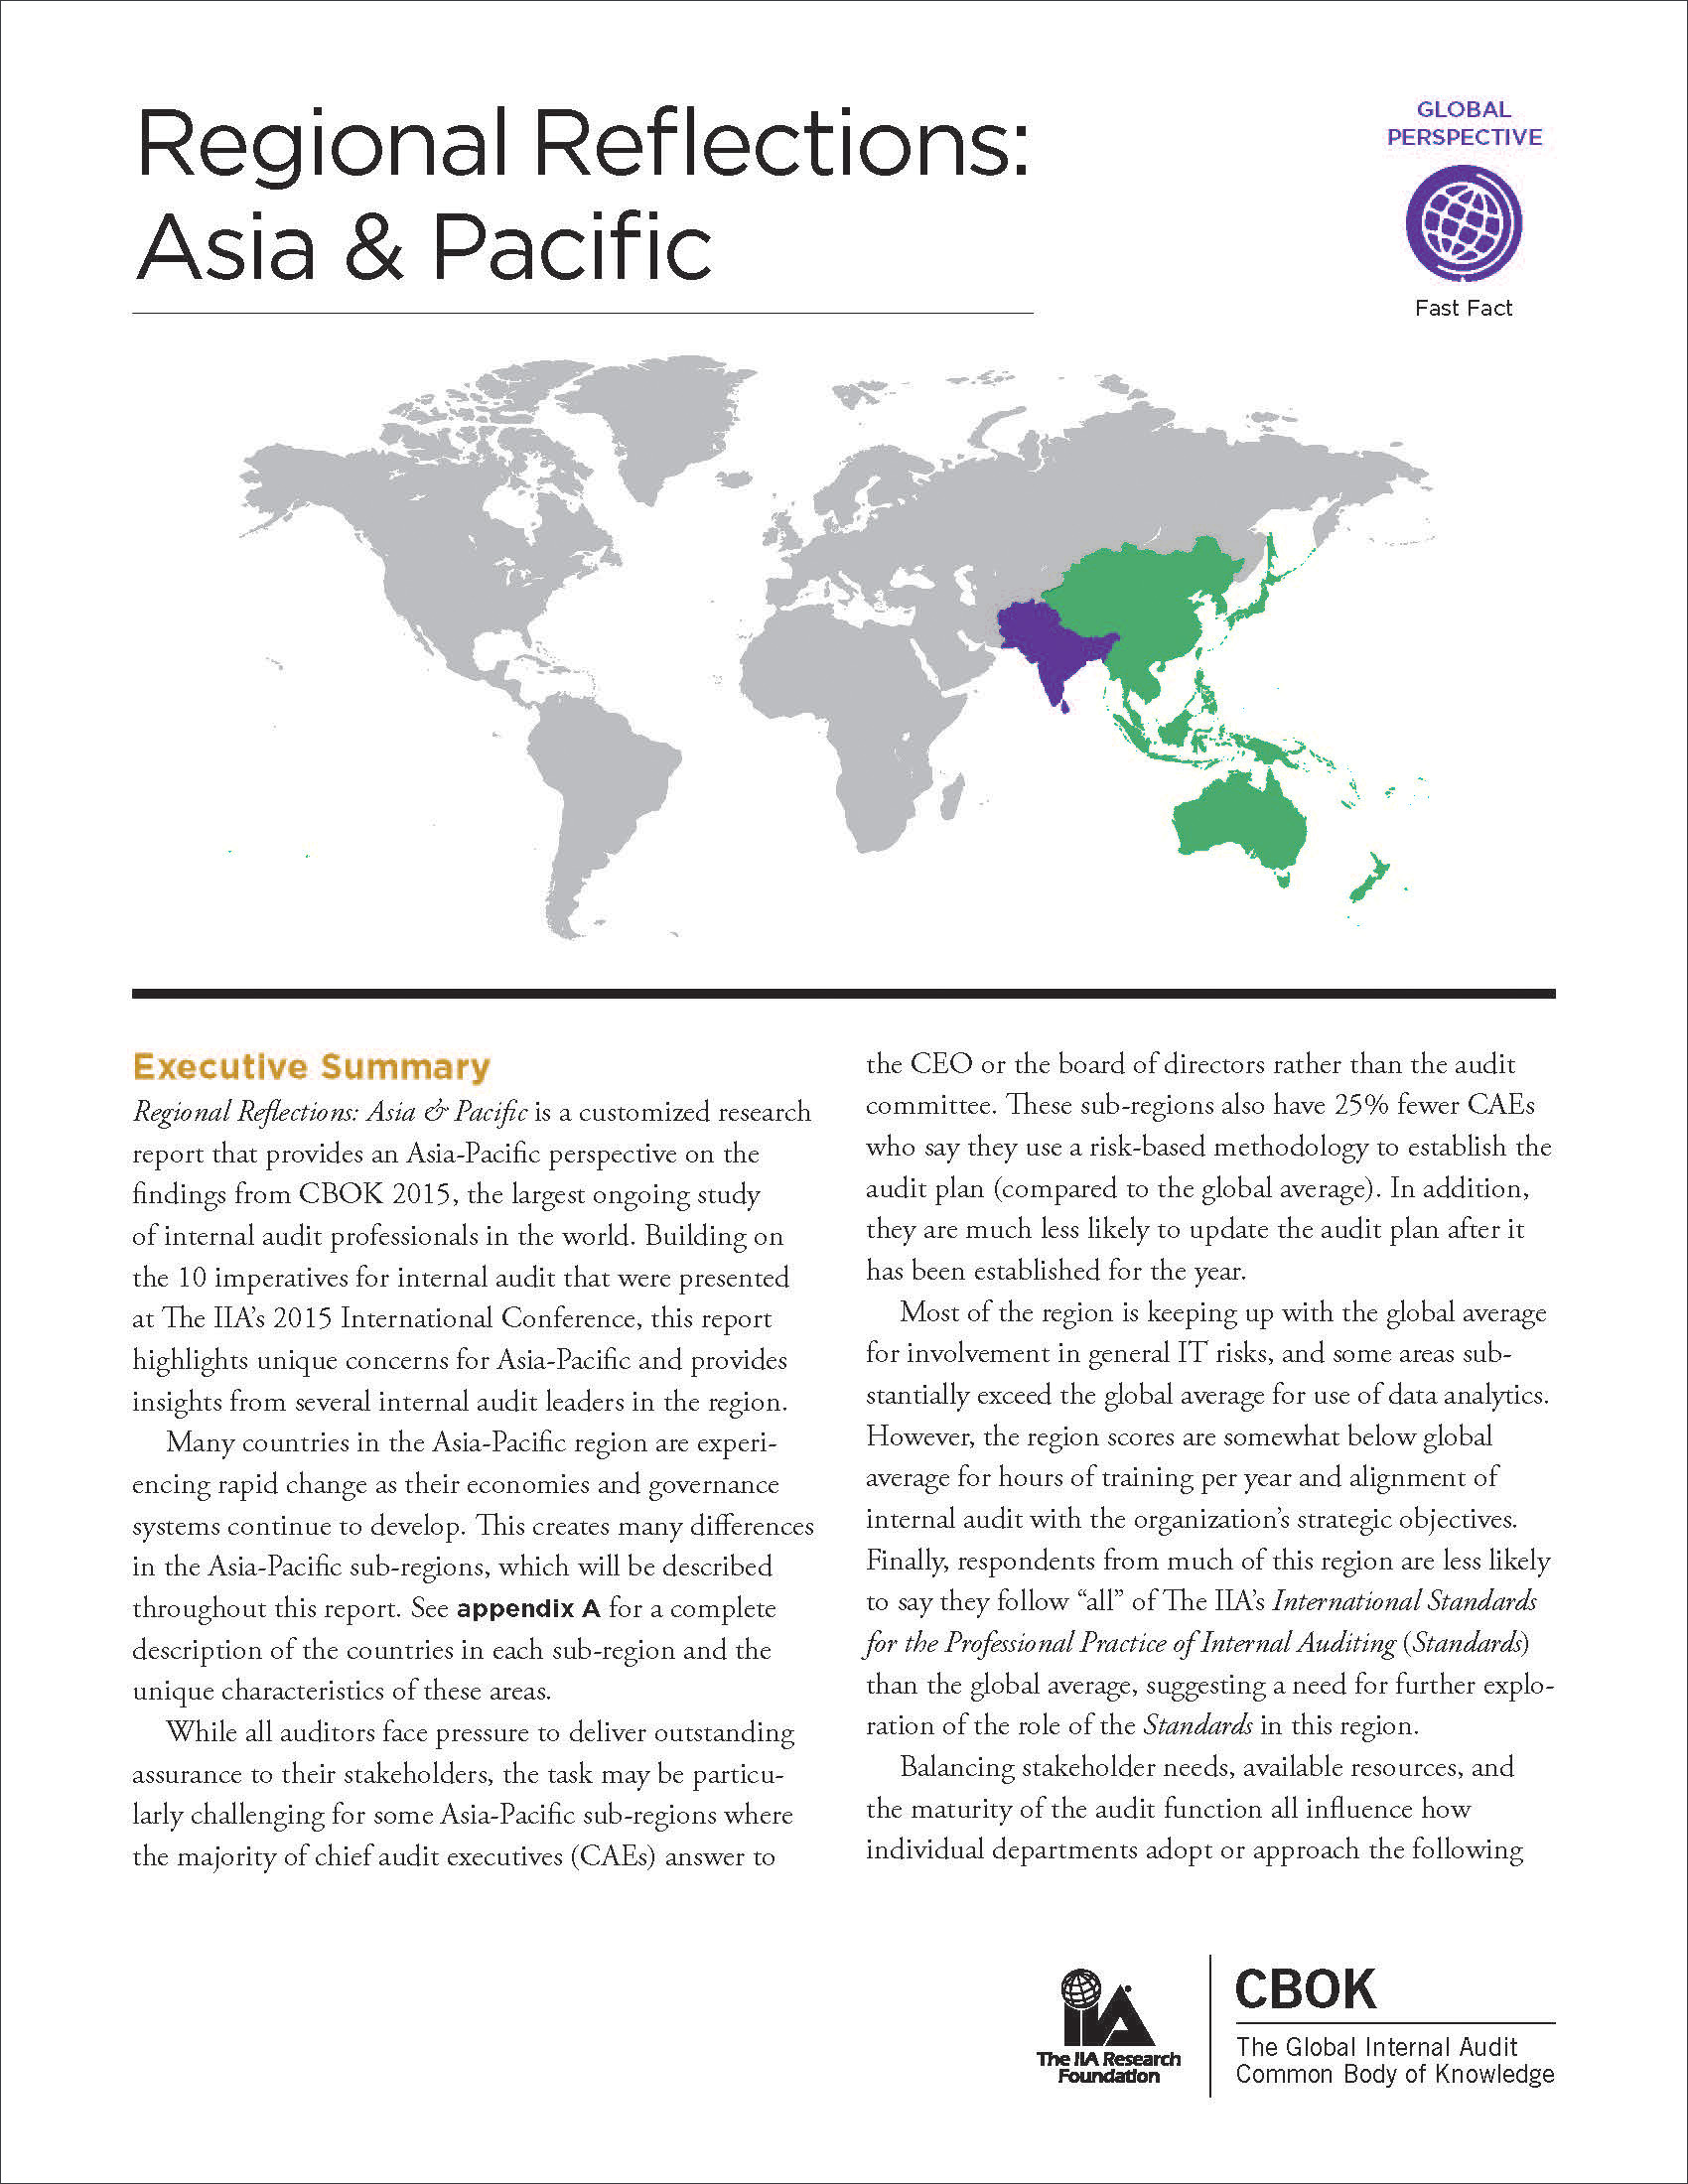 Regional Reflections: Asia & Pacific